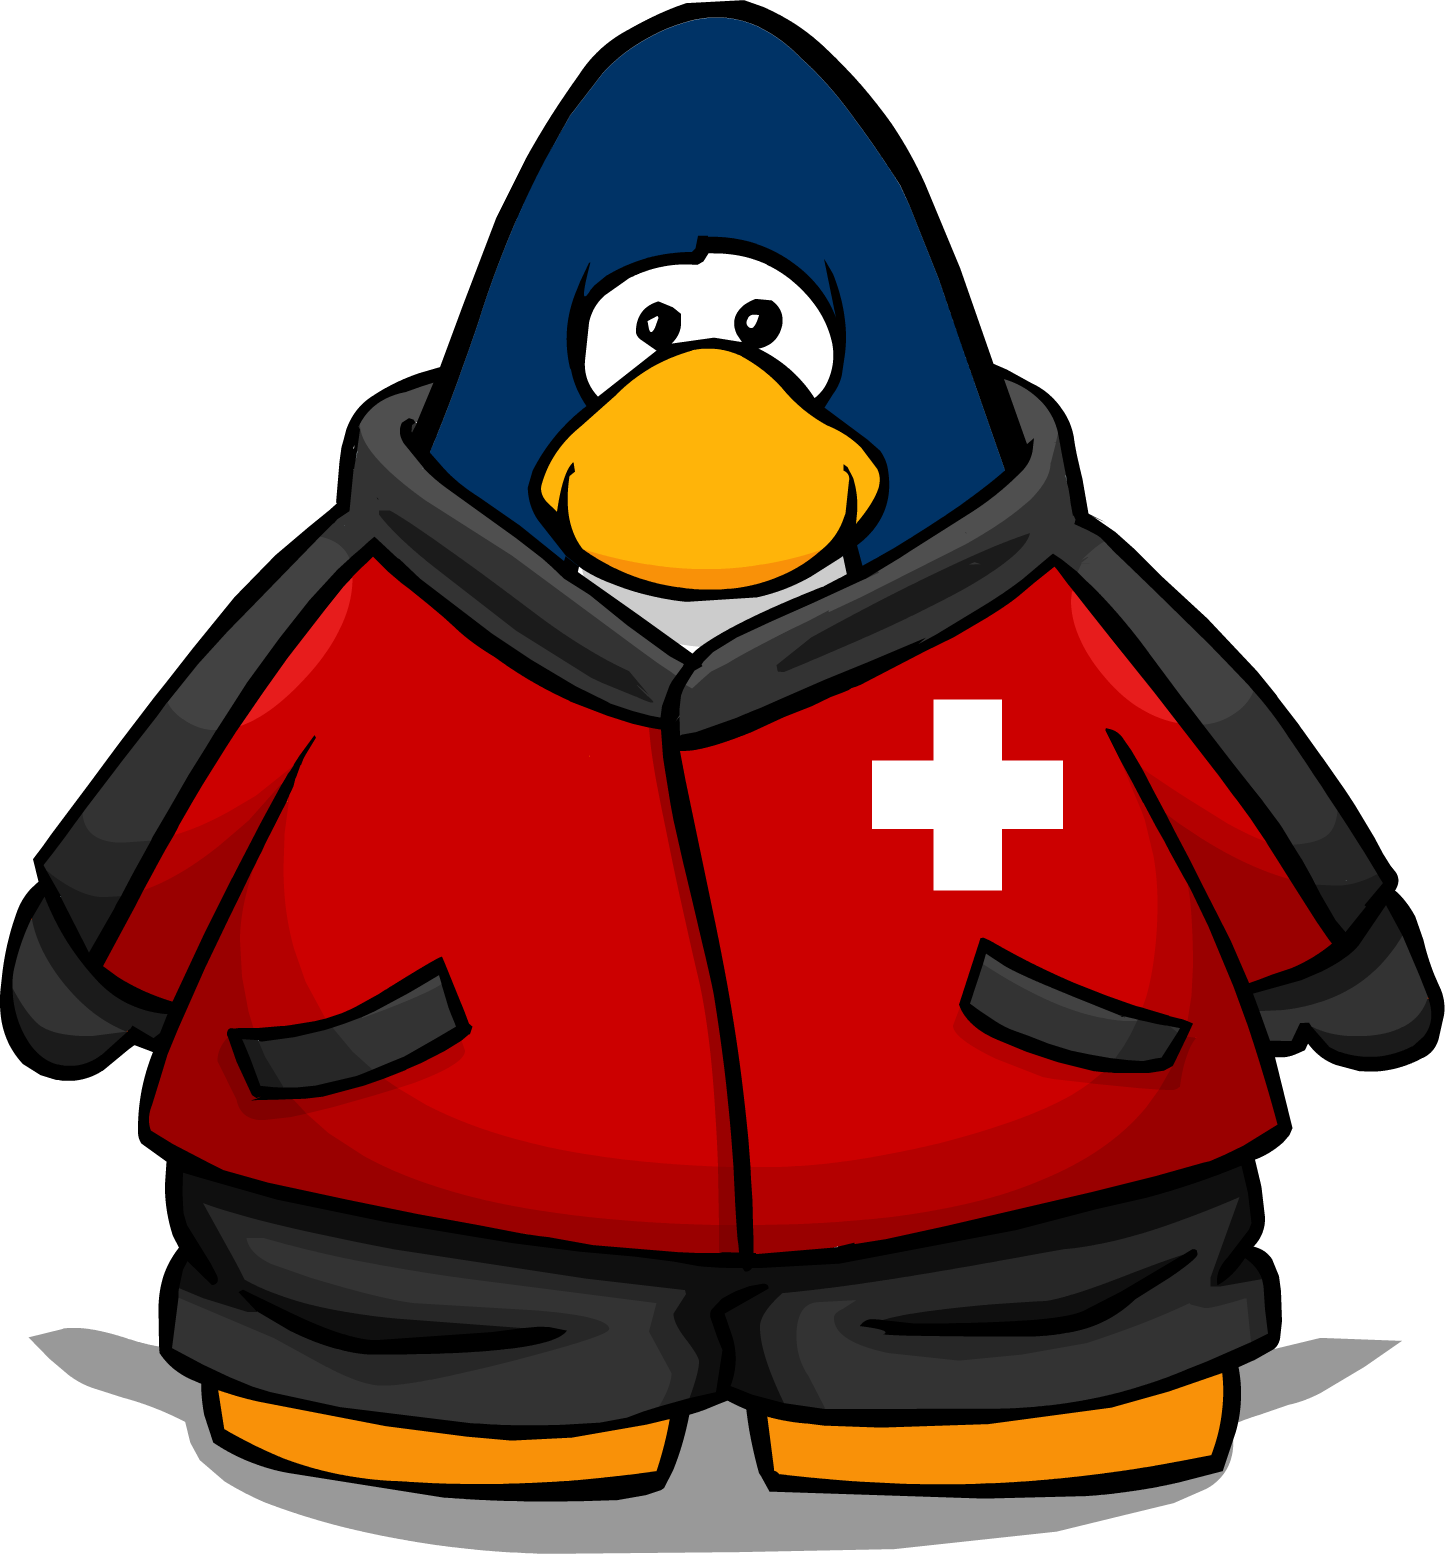 Image Ski Patrol Jacket From - Penguin With A Horn (1445x1554)